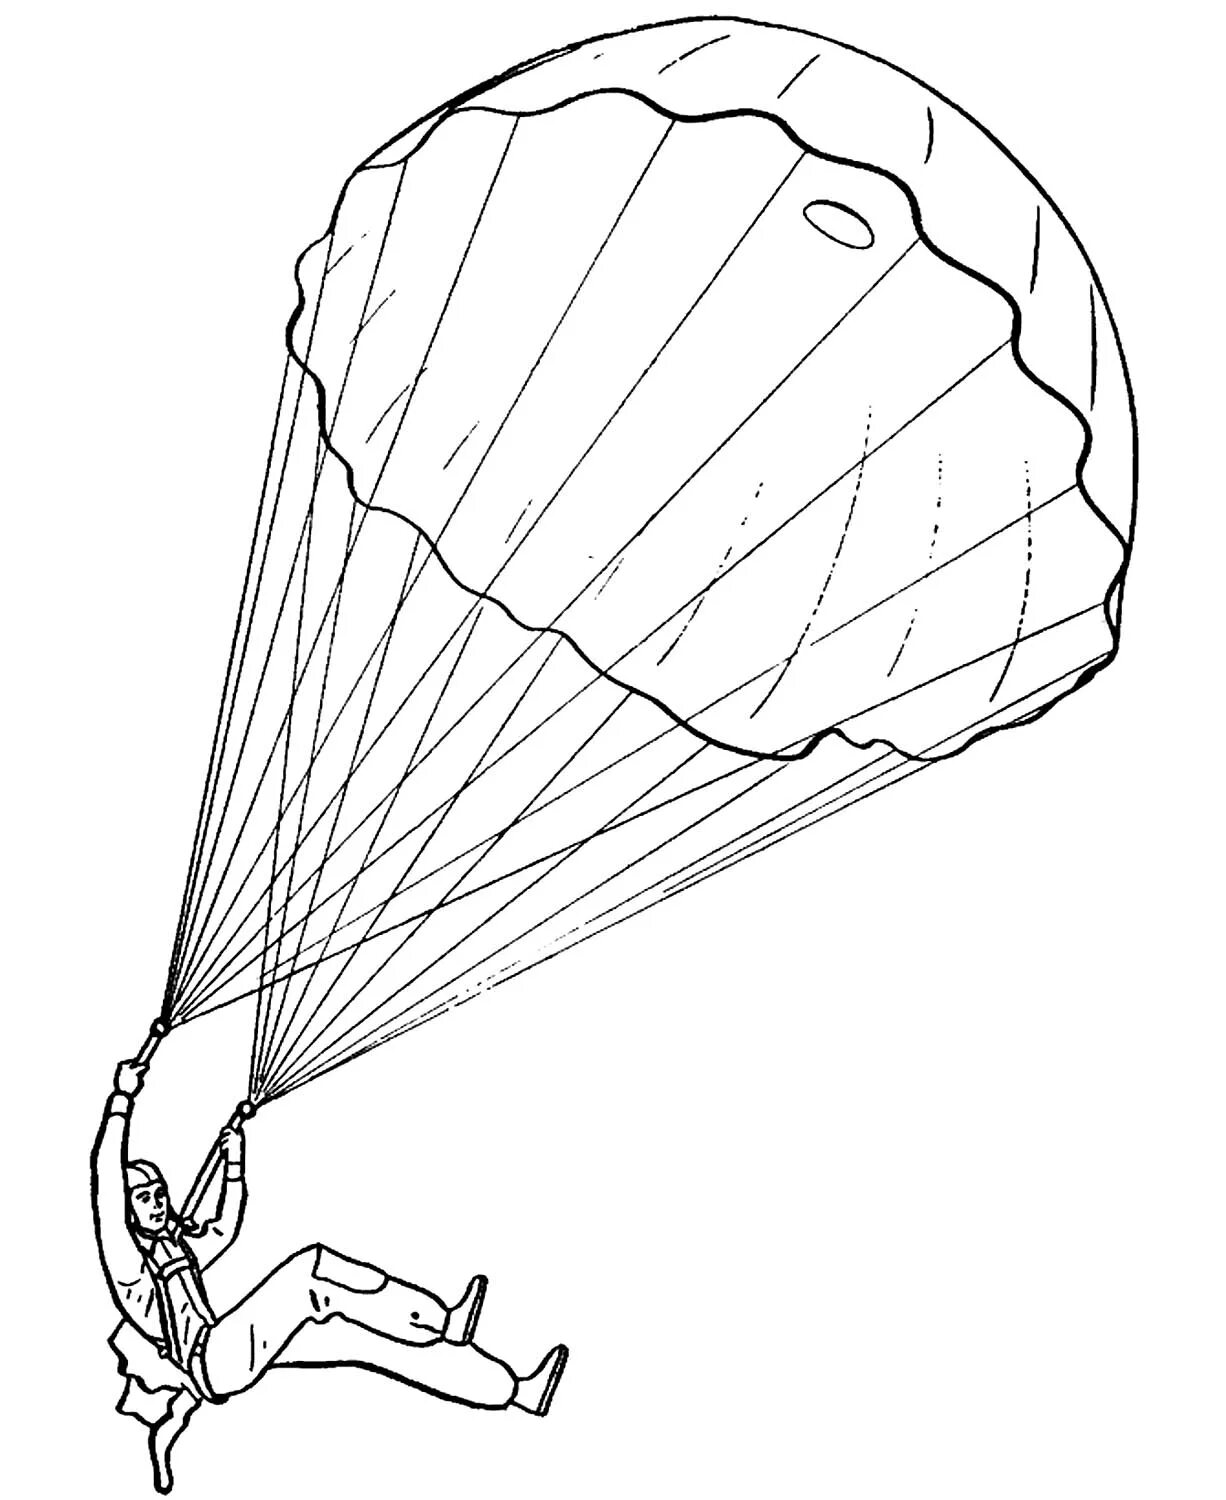 Coloring paratrooper for kids